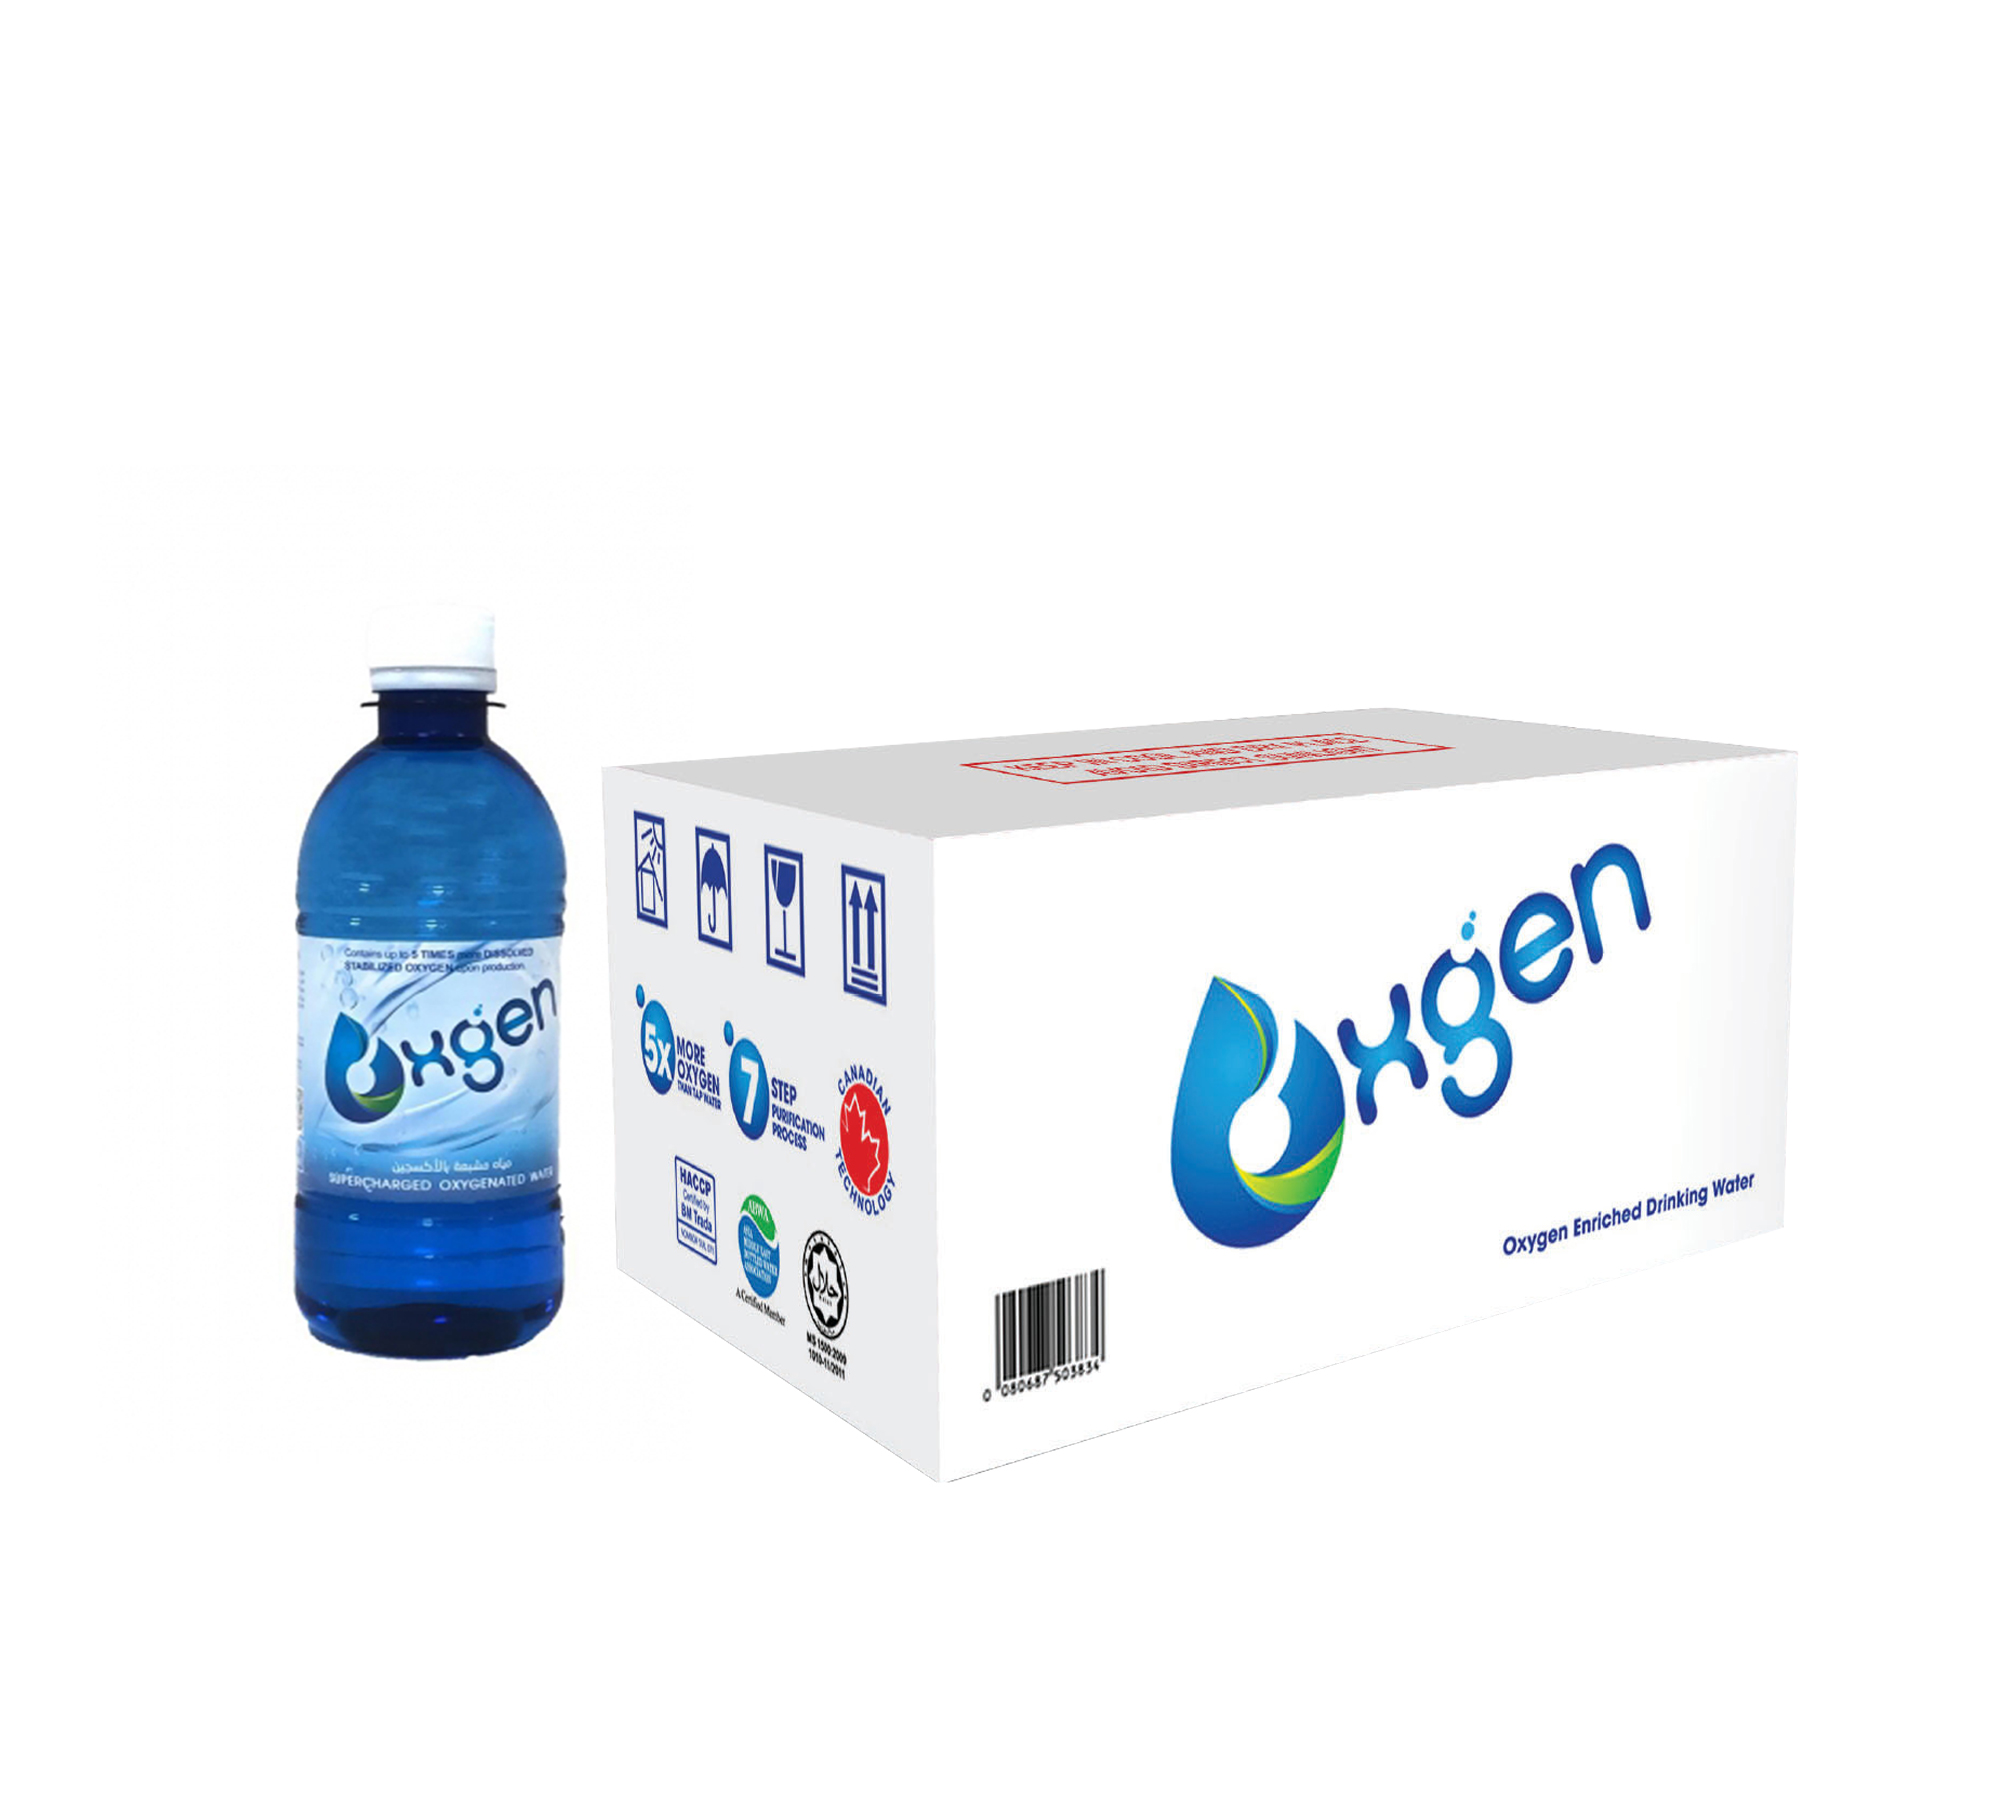 Supercharged oxygenated water